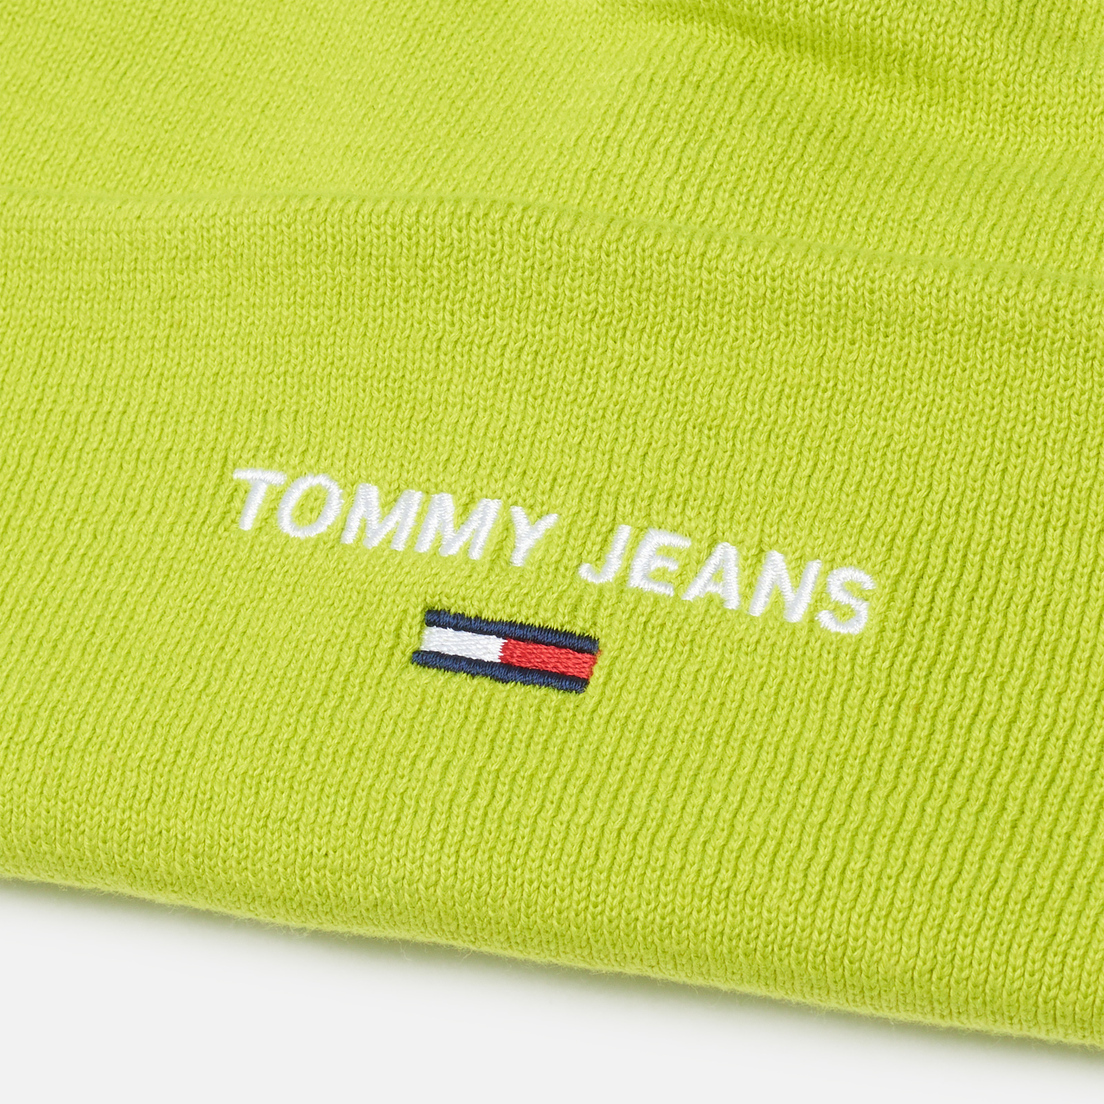 Tommy Jeans Шапка Sport Neon